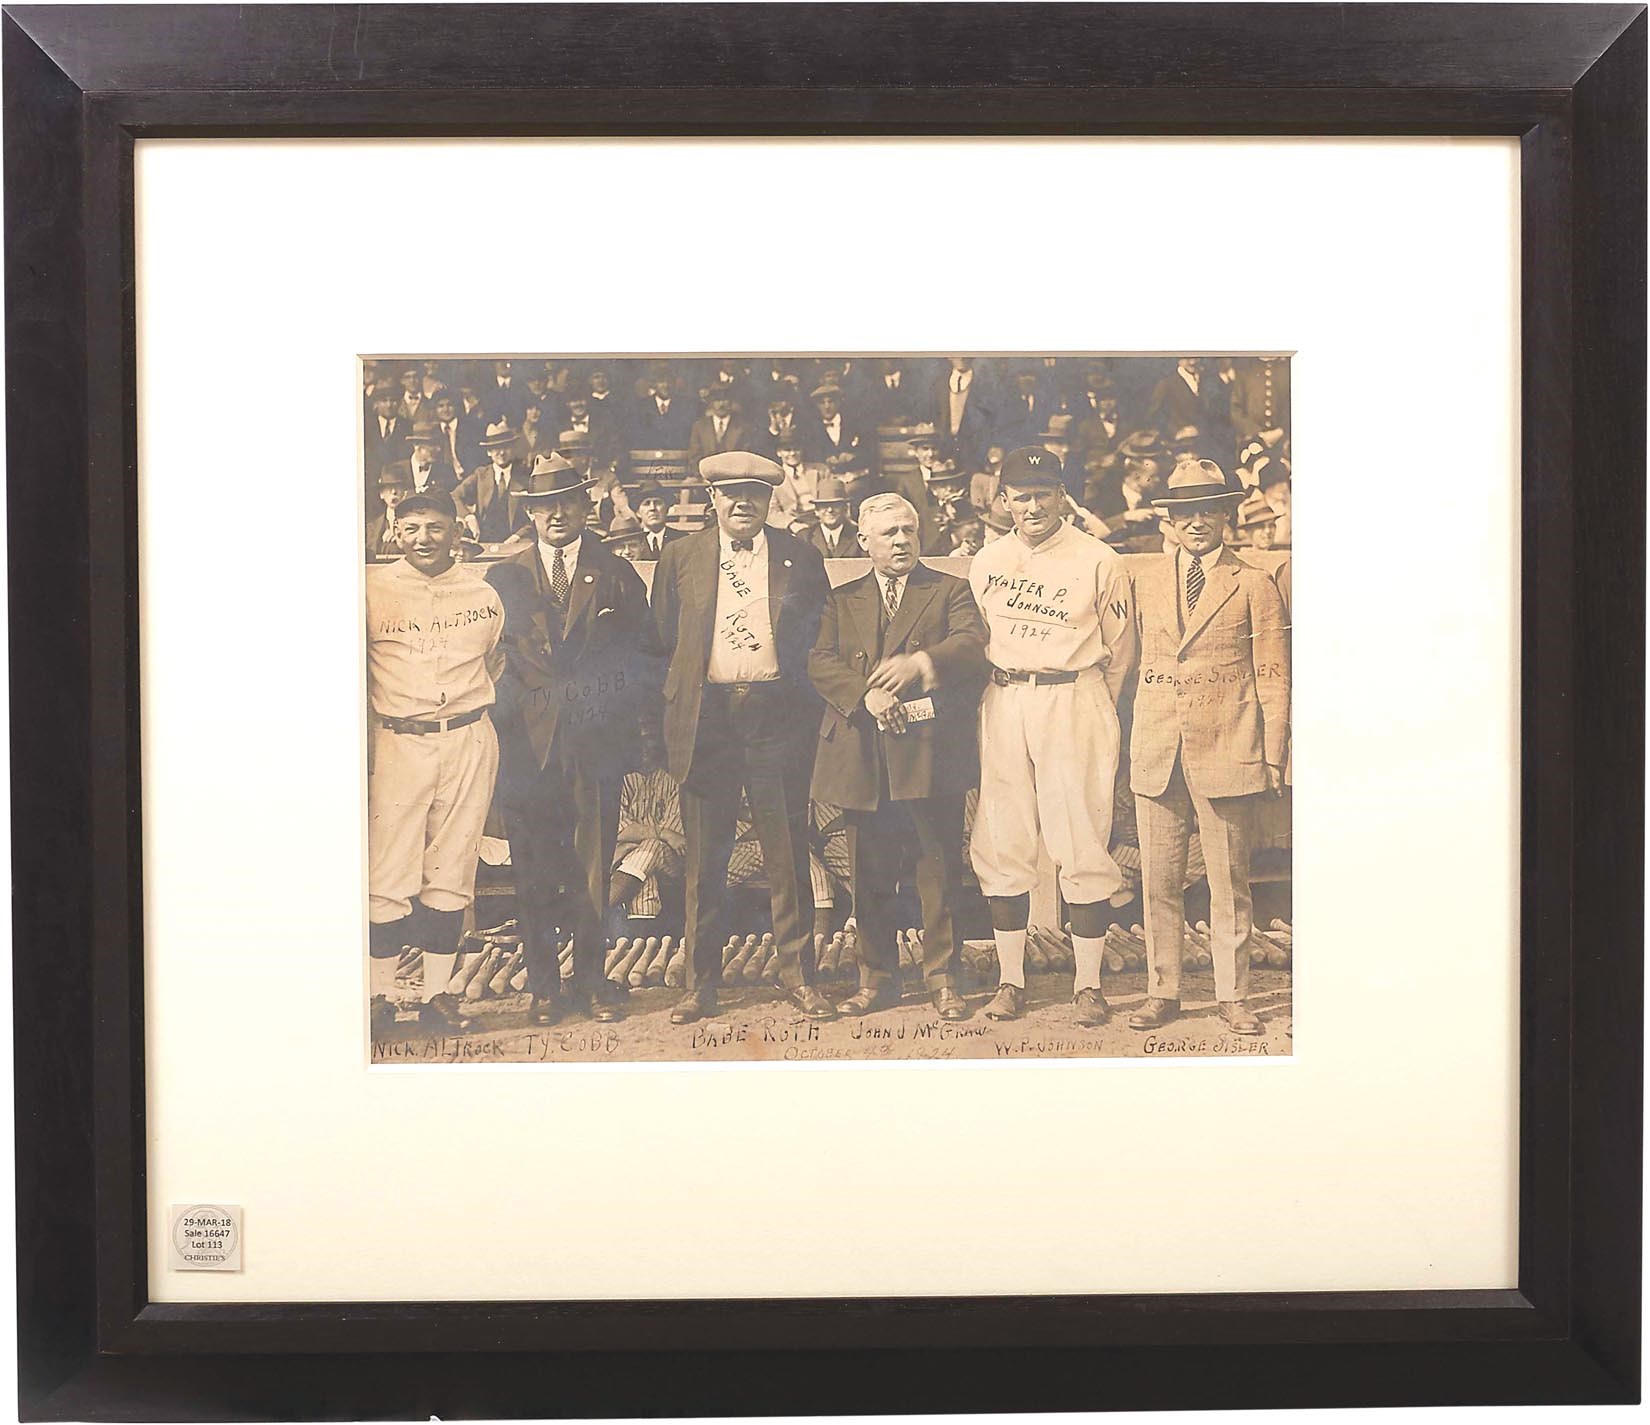 Ruth and Gehrig - 1924 World Series Photograph w/Ruth & Cobb (ex-Christy Walsh)